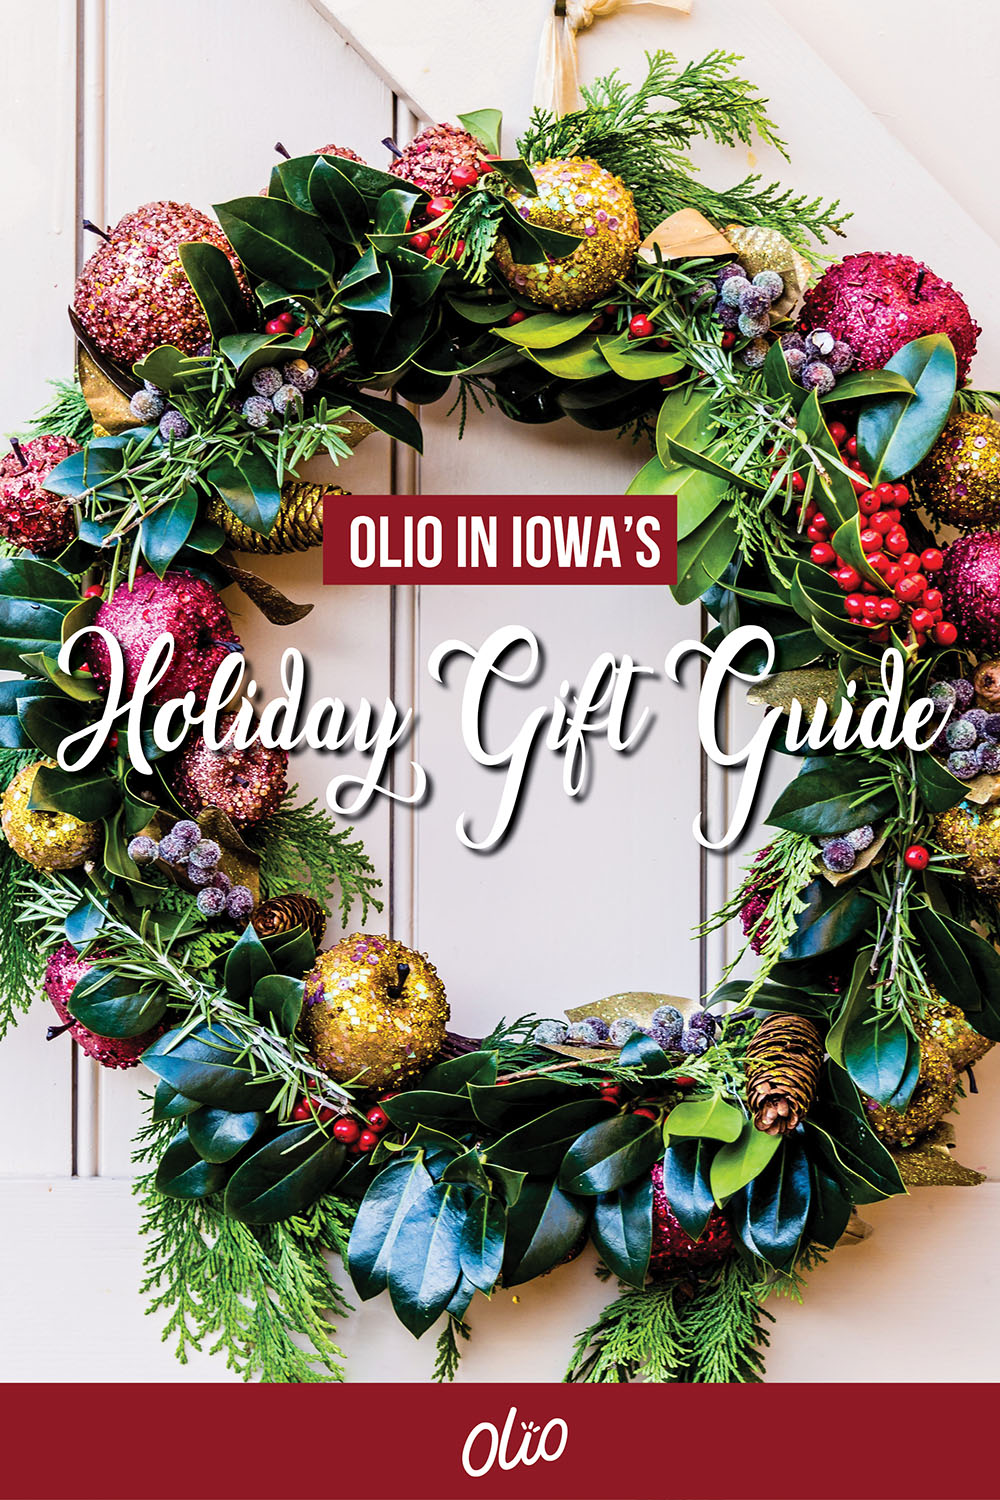 It's the most wonderful time of the year! Olio in Iowa's 2019 Holiday Gift Guide is here. Each year, this guide includes dozens of travel inspired gifts for everyone on your list.